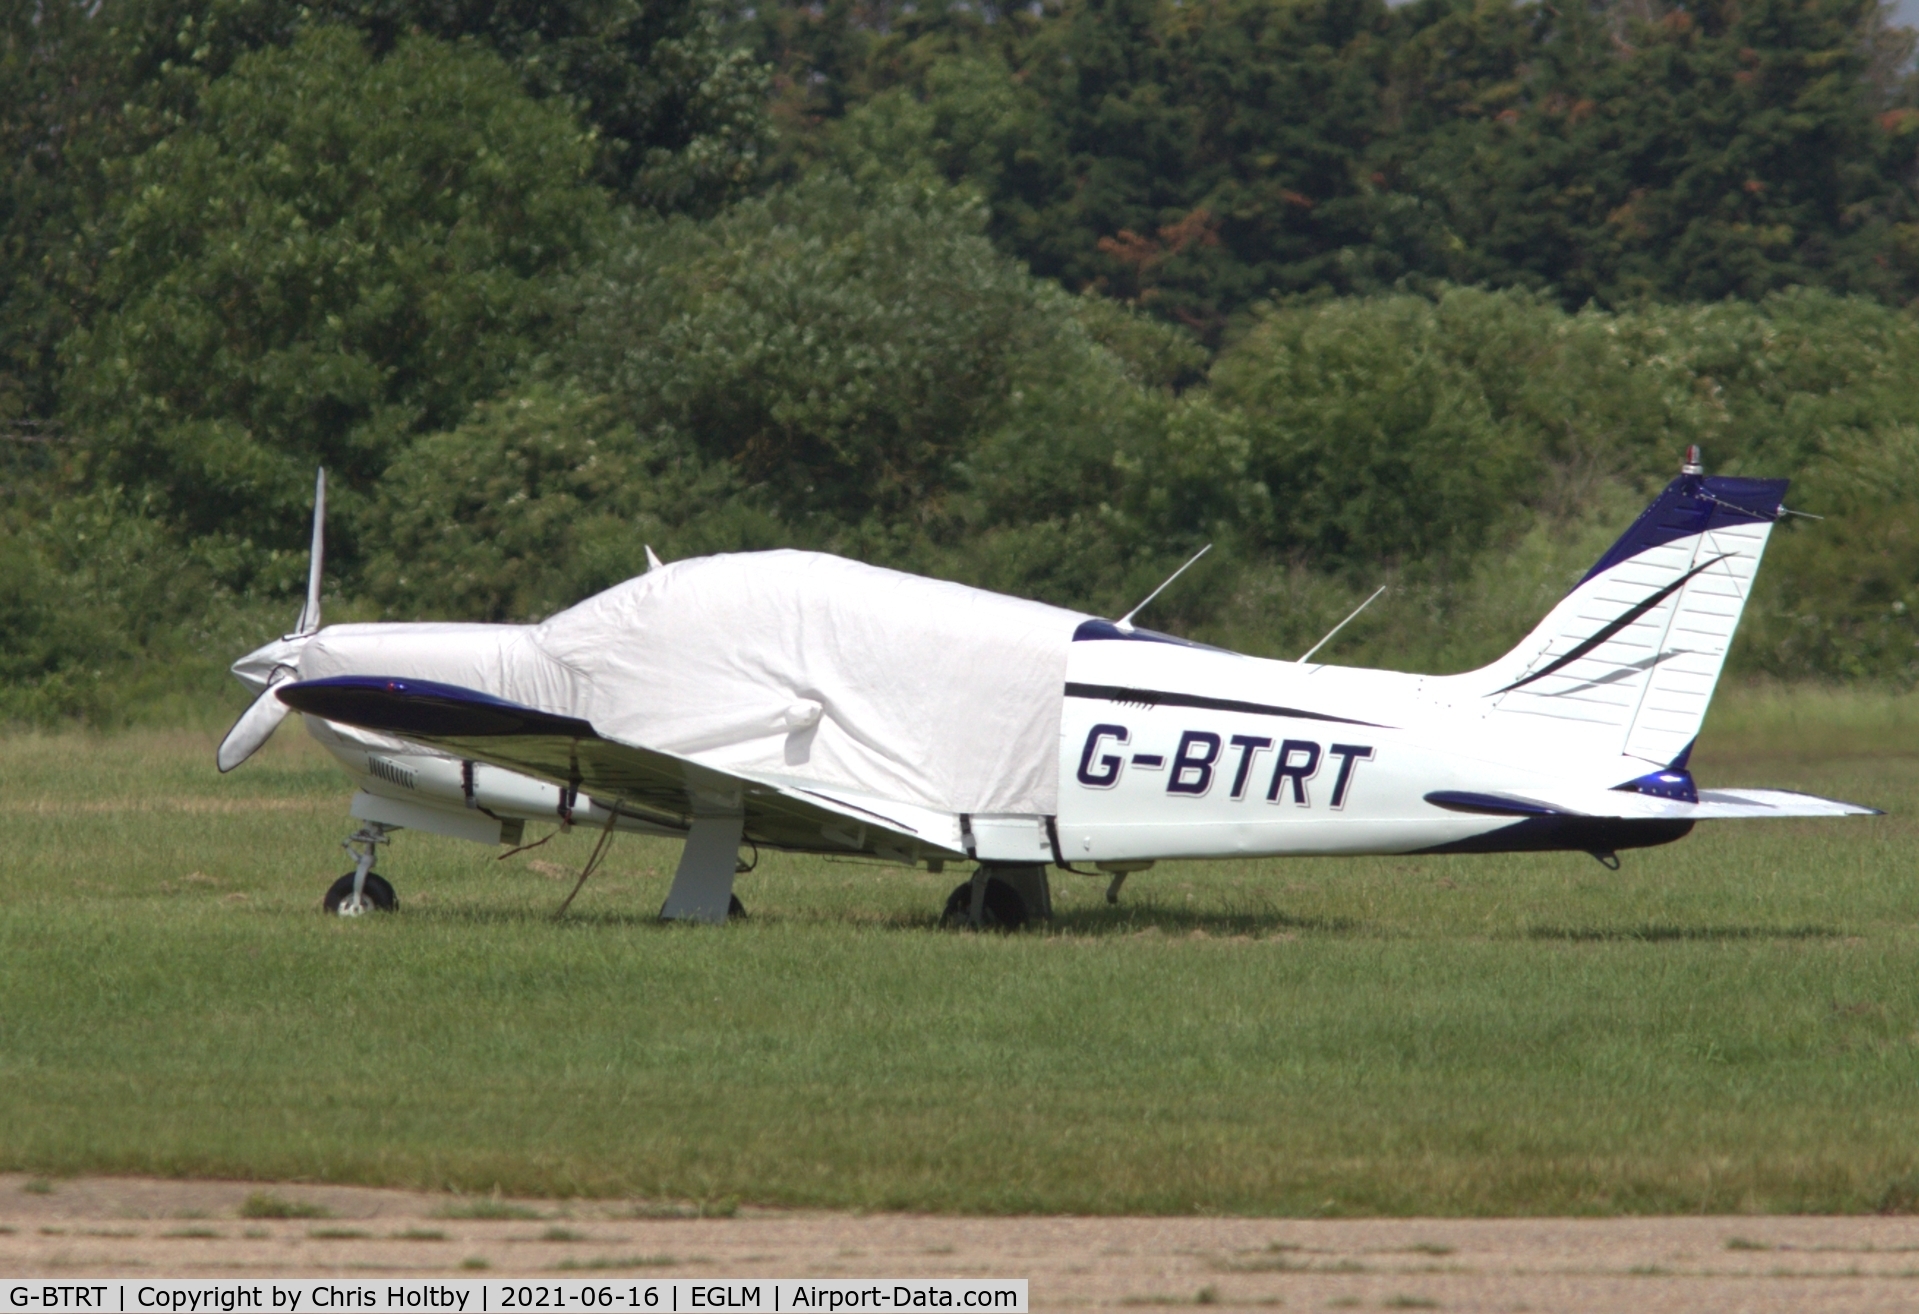 G-BTRT, 1975 Piper PA-28R-200 Cherokee Arrow C/N 28R-7535270, Parked at White Waltham in navy and white livery